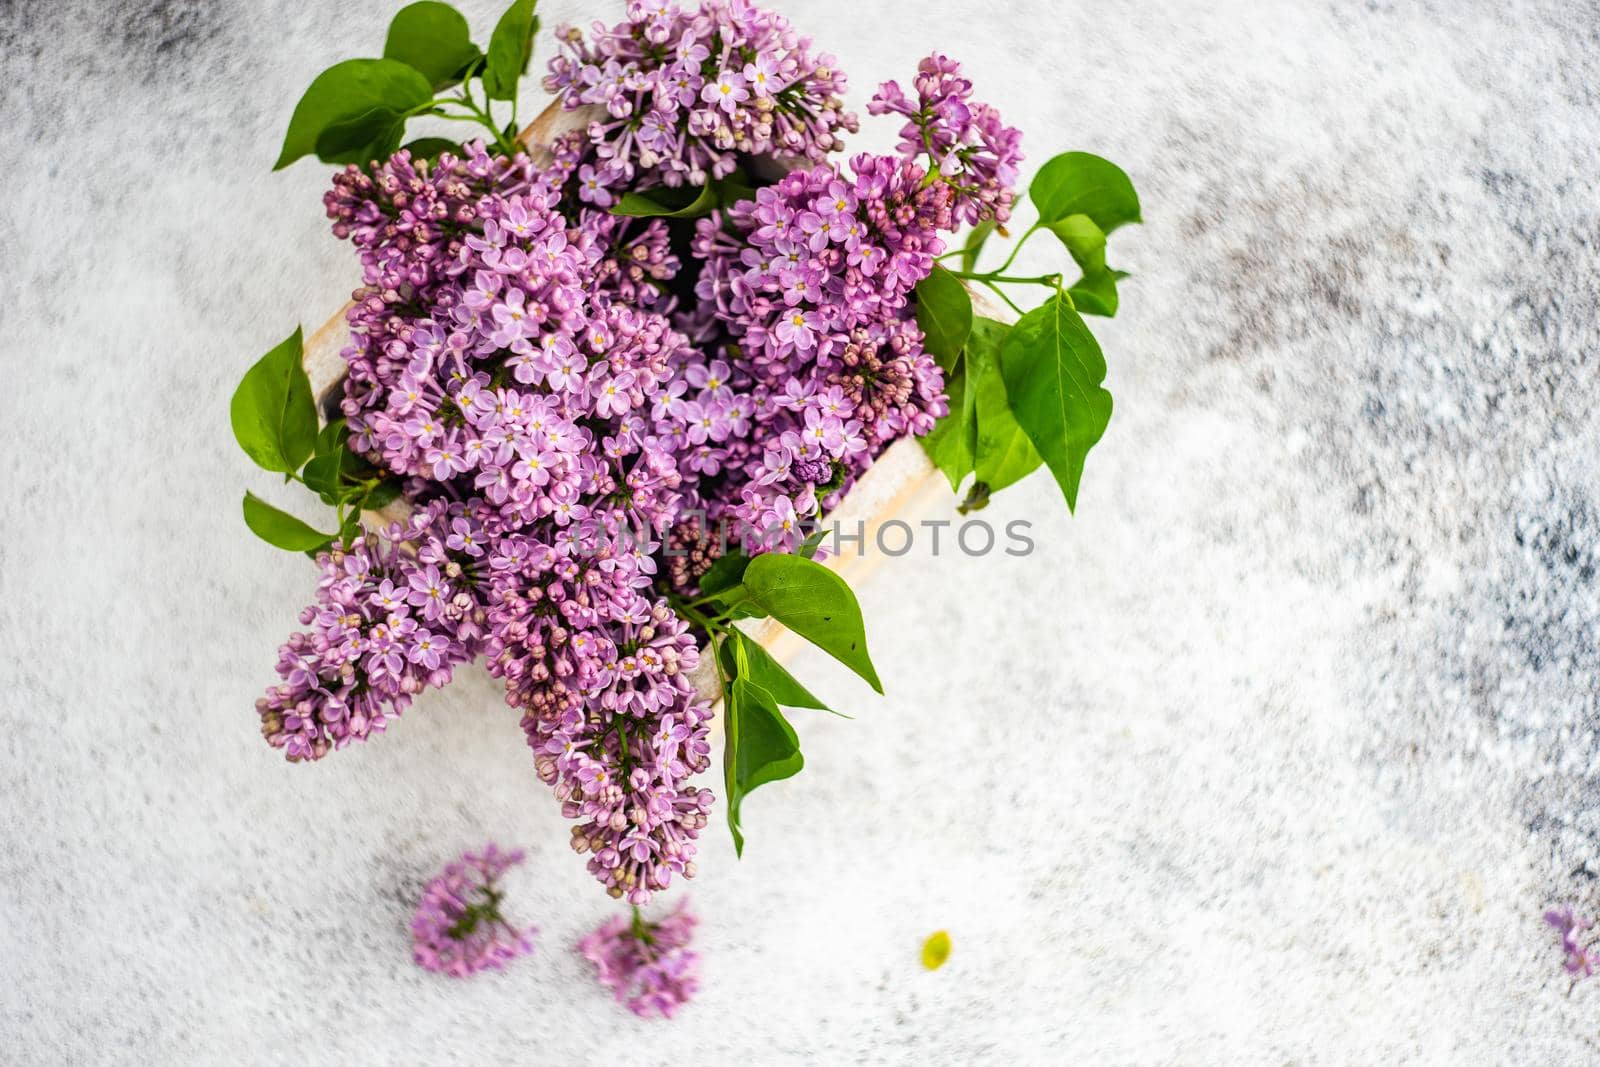 Minimalistic home interior decor with lilac flowers by Elet